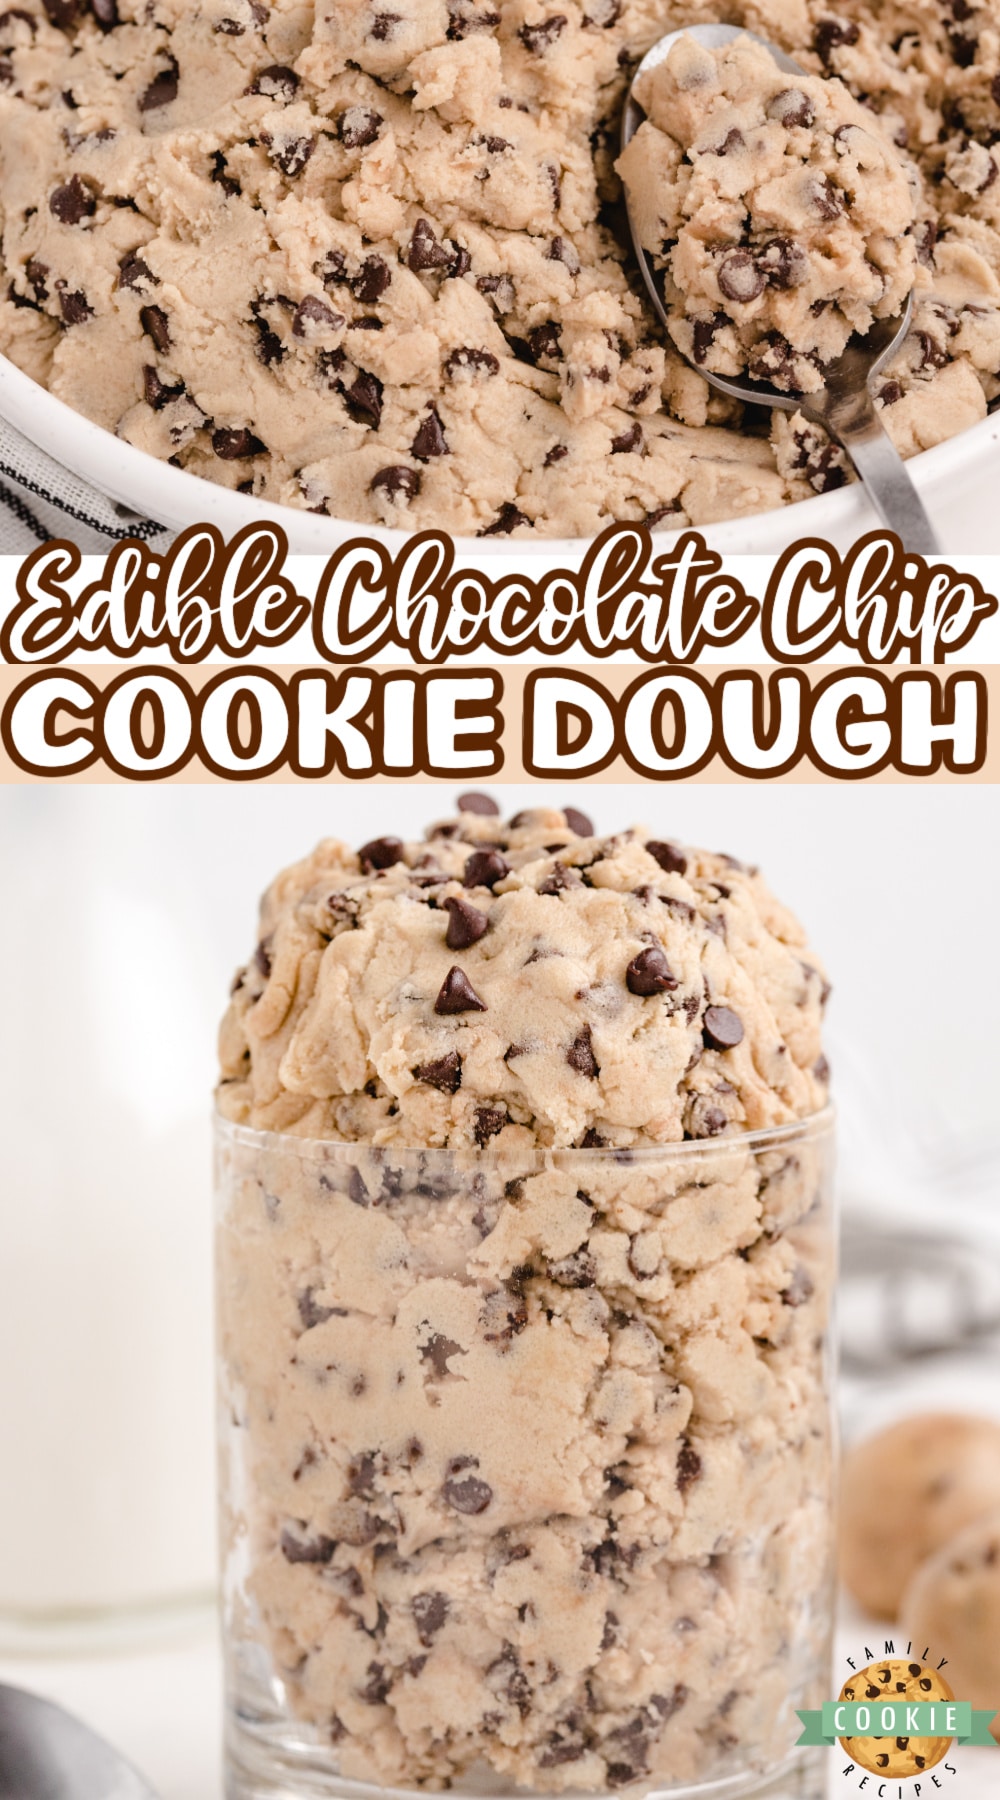 Edible Chocolate Chip Cookie Dough made with heat-treated flour, no eggs and all of the cookie dough flavor that you love. Chocolate chip cookie dough that is completely safe to eat! via @buttergirls